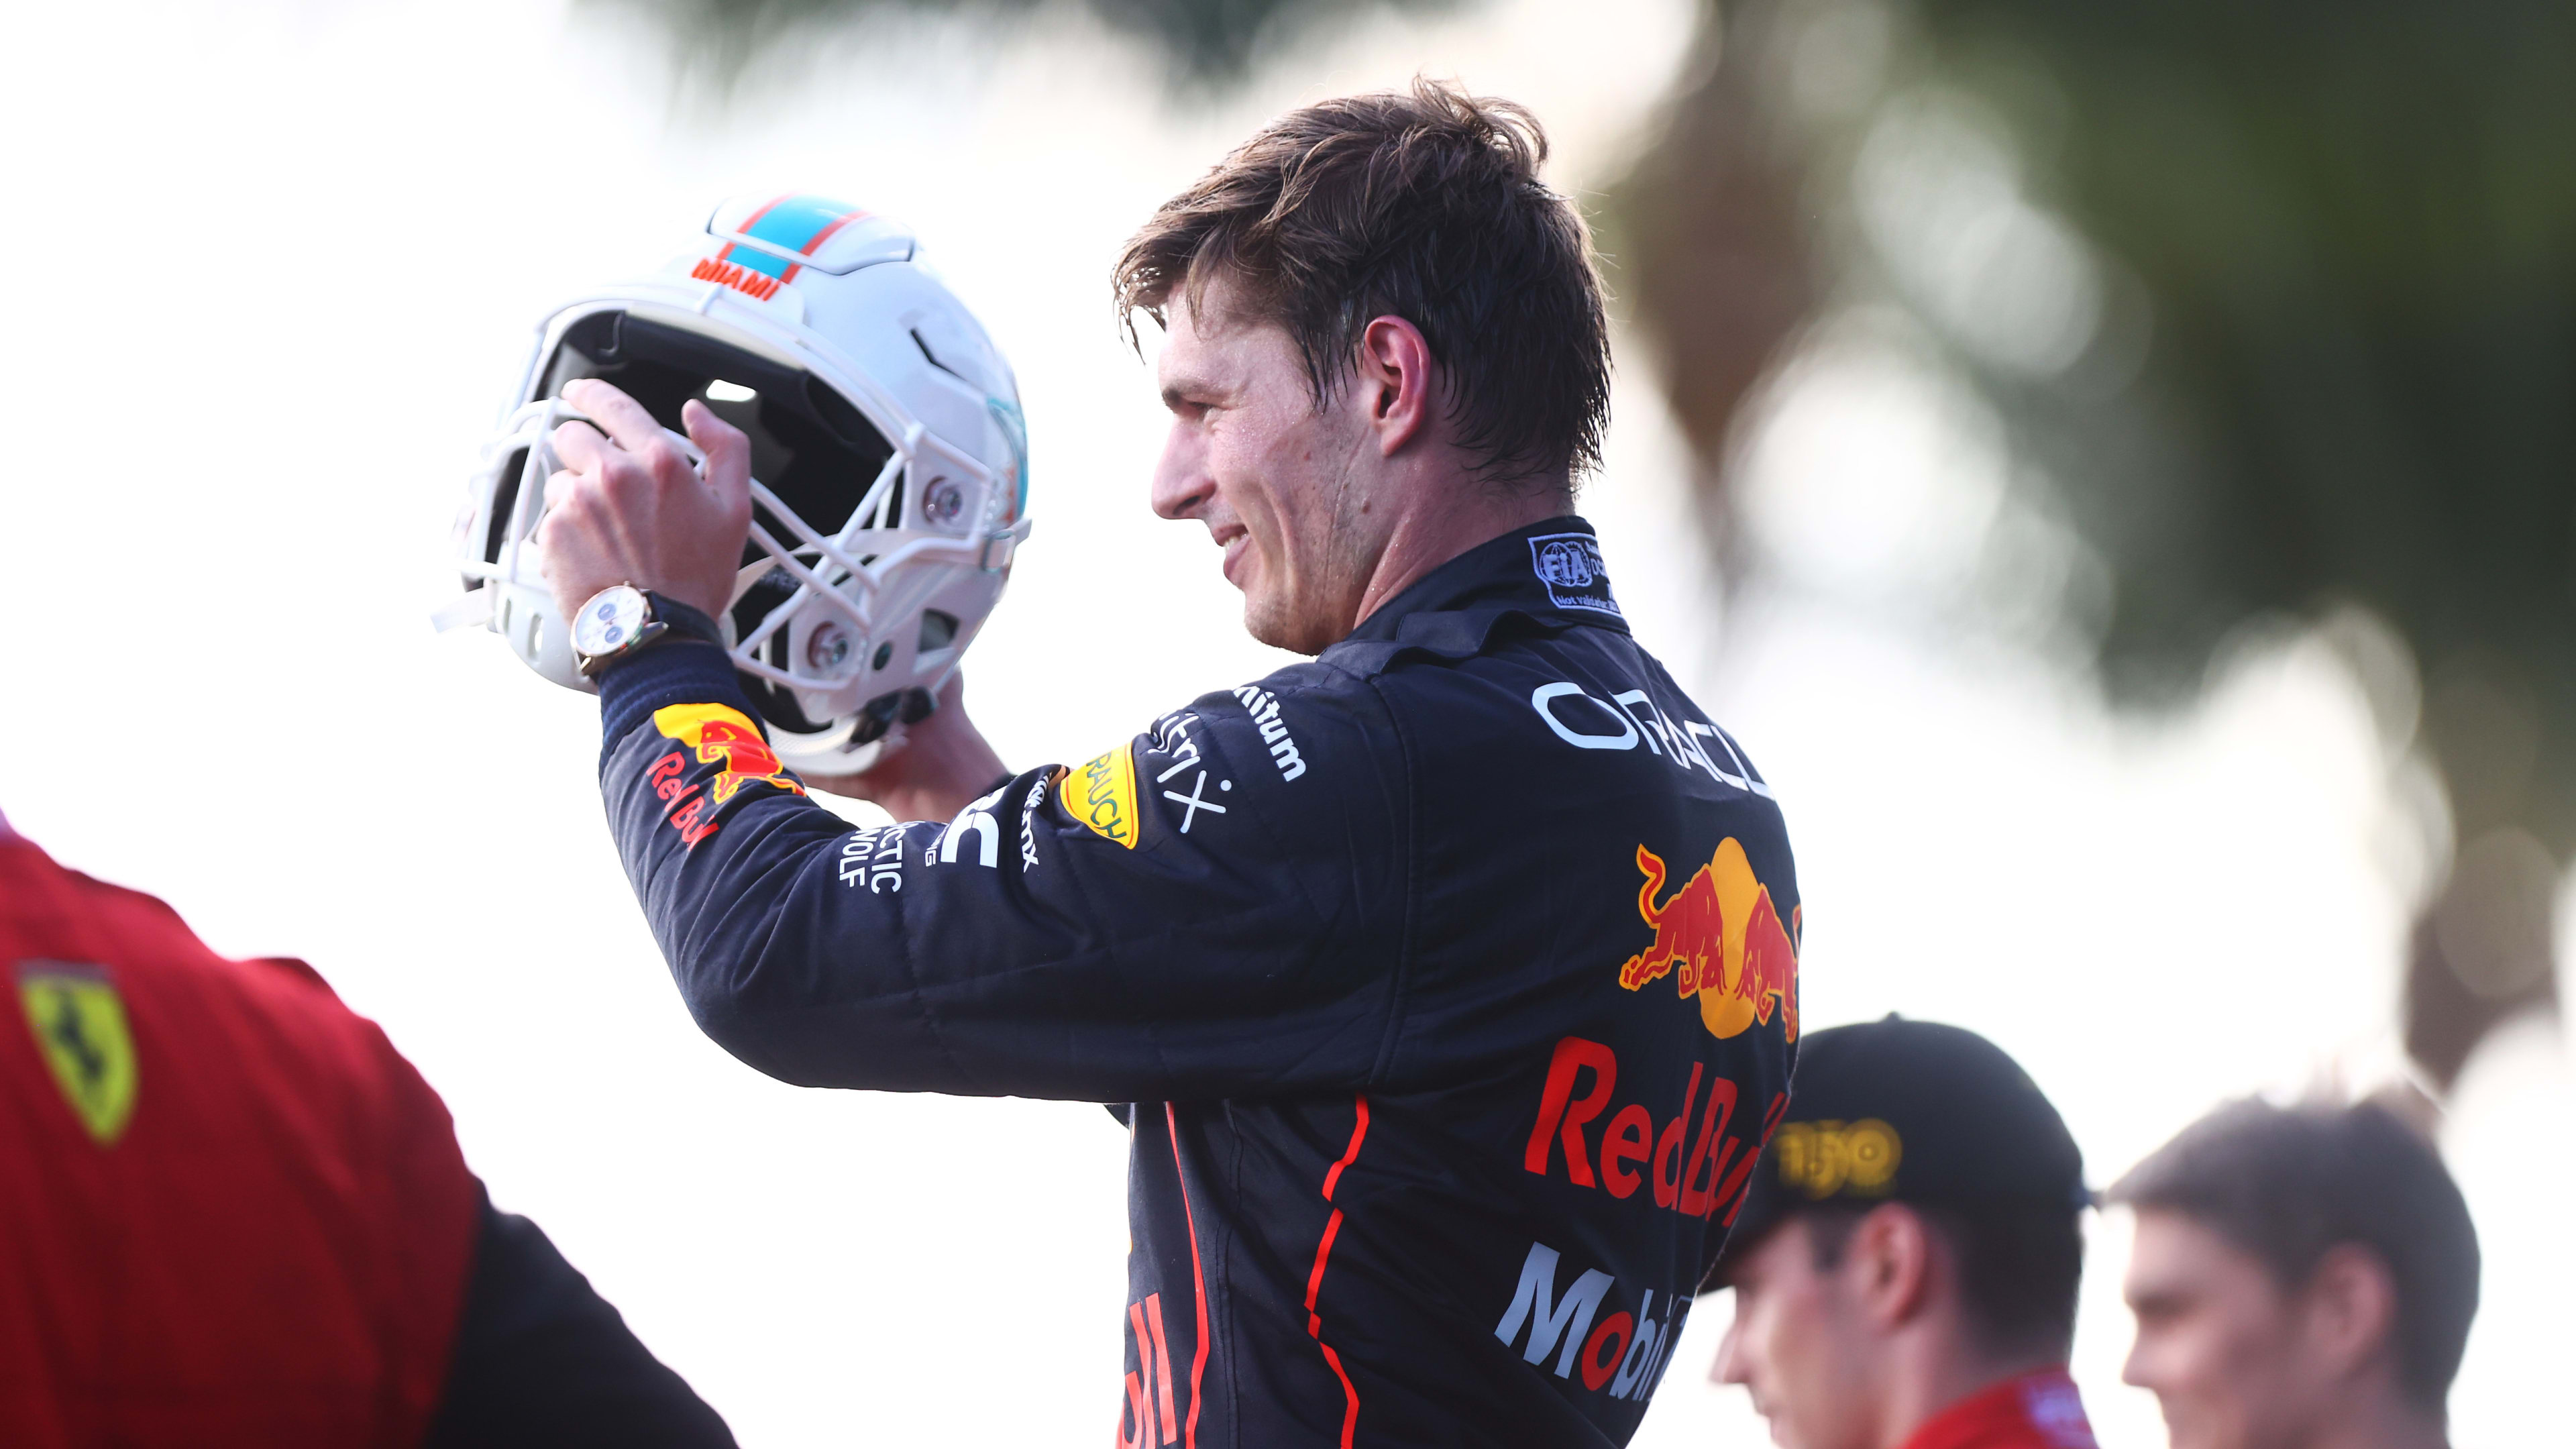 Verstappen wins inaugural Miami Grand Prix over Leclerc after late Safety Car drama - Formula 1